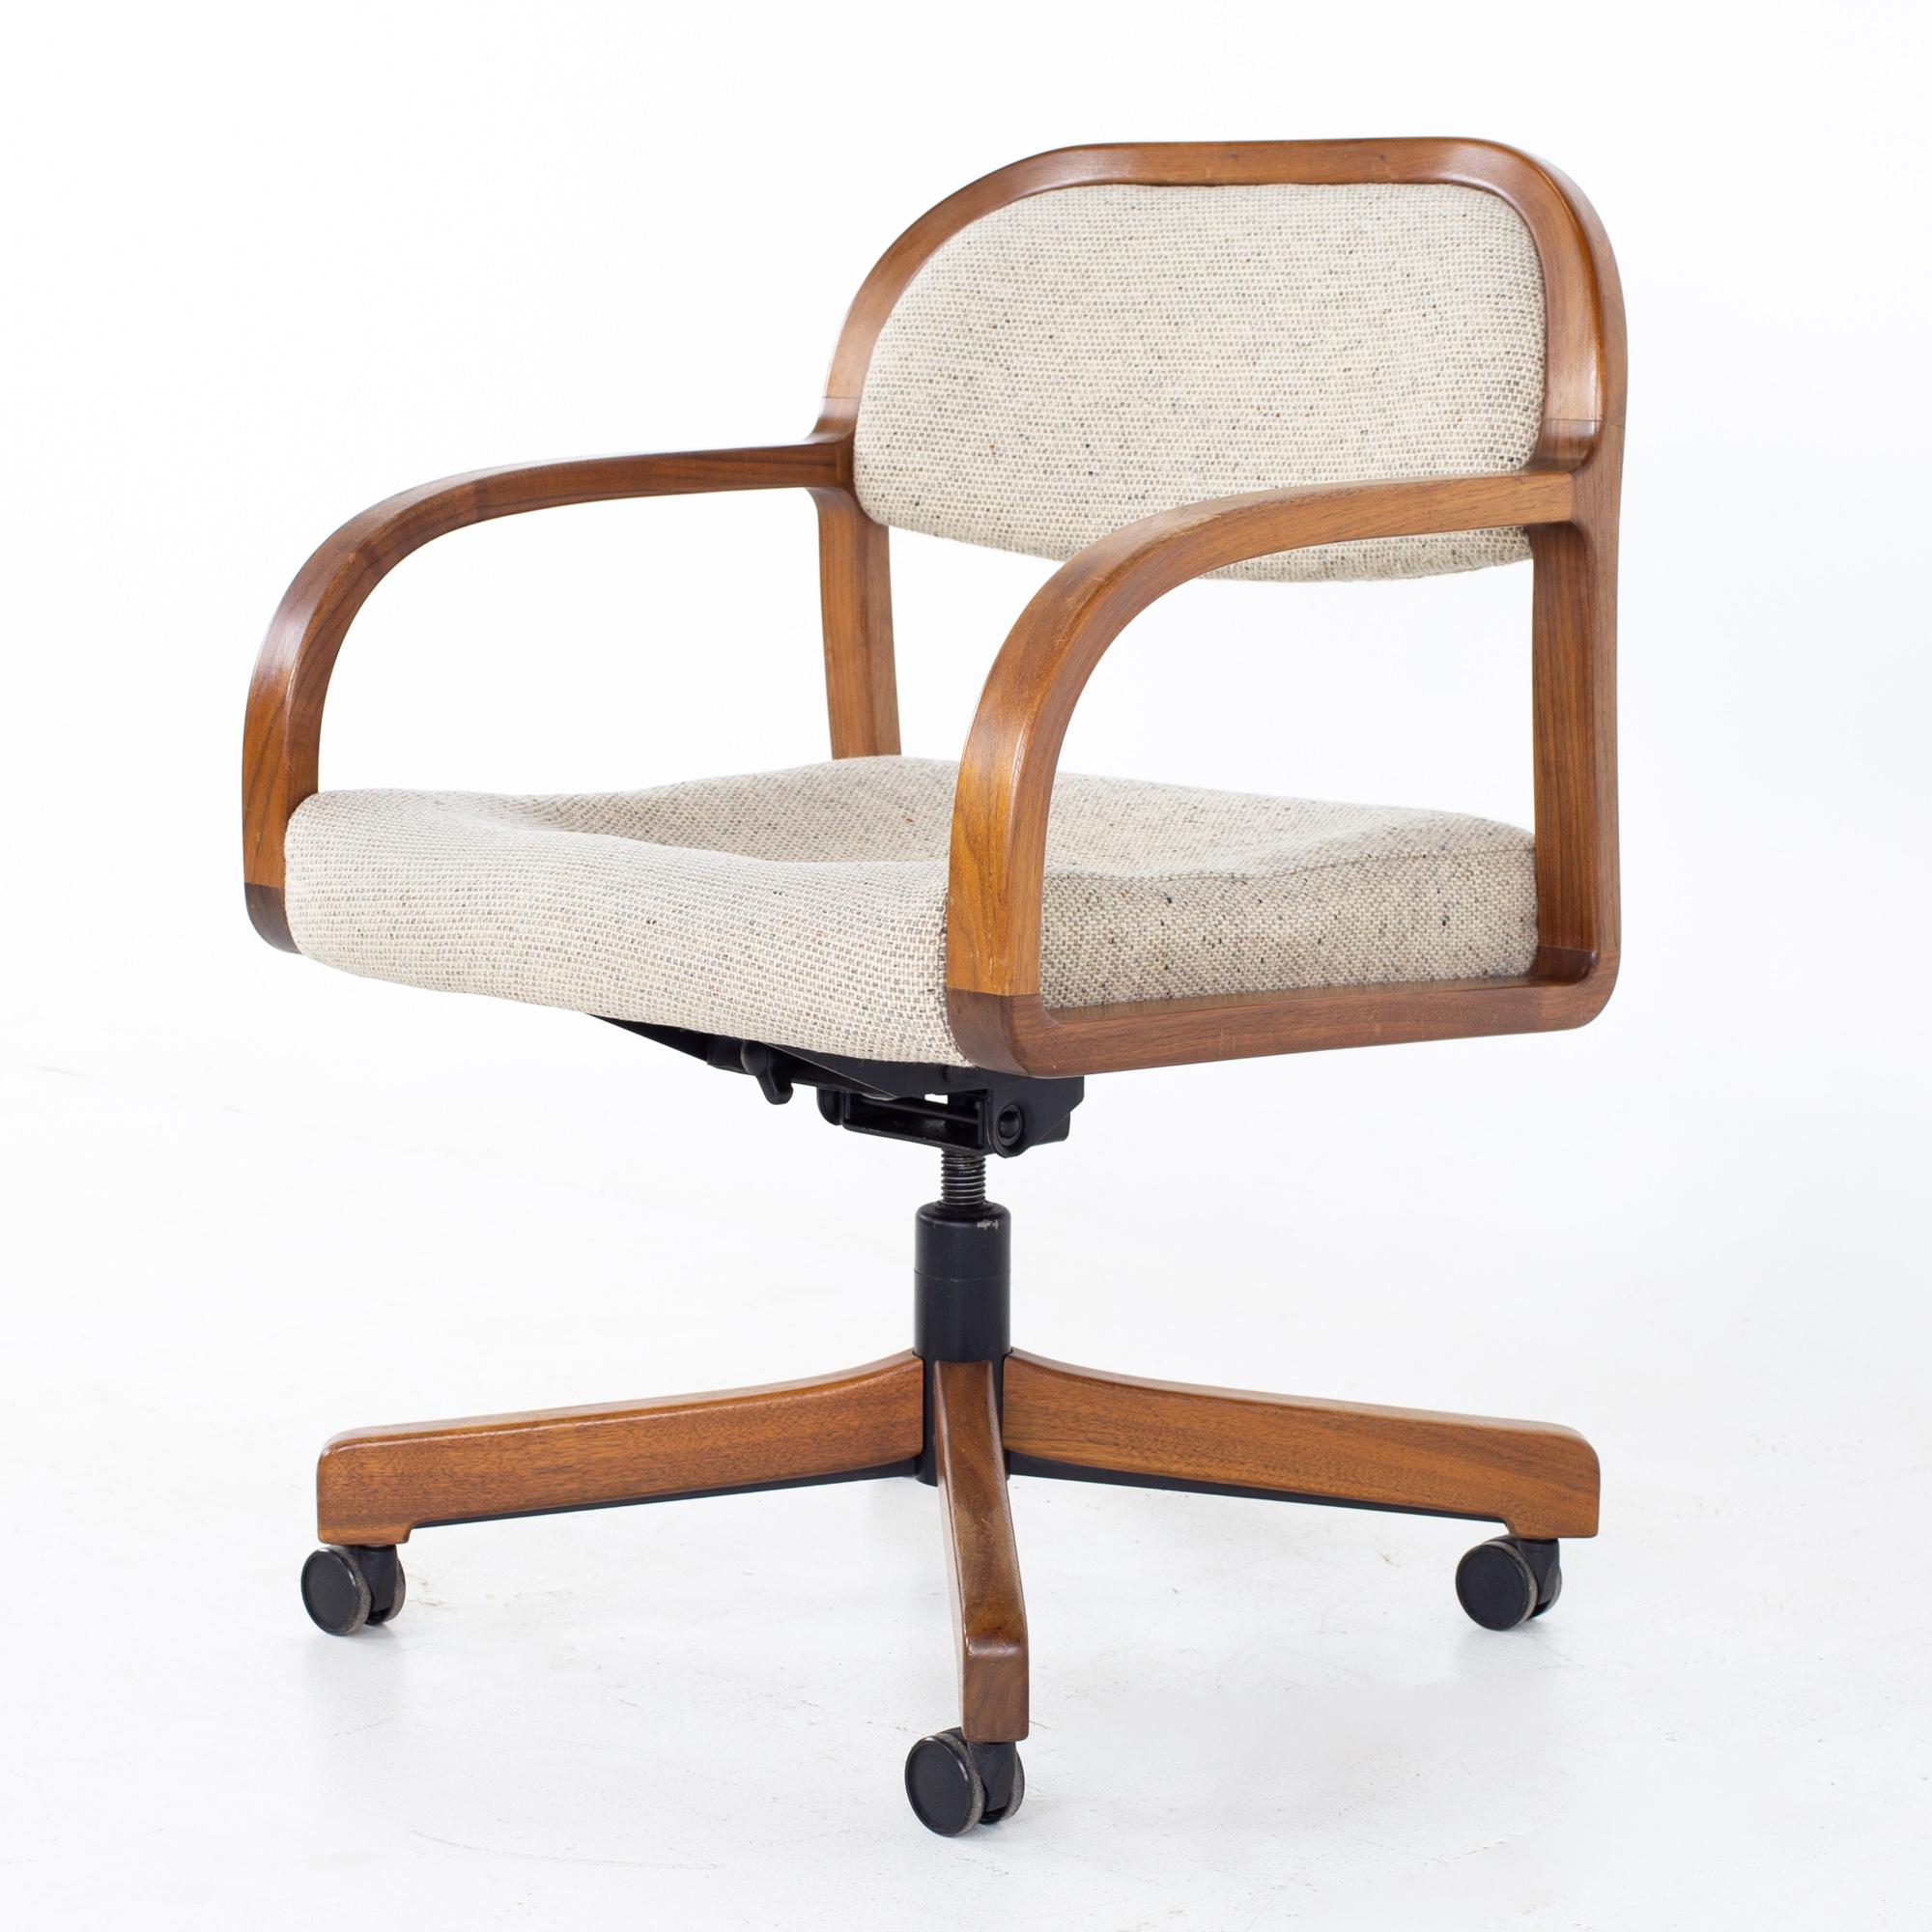 Jens Risom mid century walnut rolling office desk chair.
Chair measures: 22.75 wide x 22 deep x 33 high, with a seat height of 18.5 inches and arm height of 25.5 inches 

All pieces of furniture can be had in what we call restored vintage